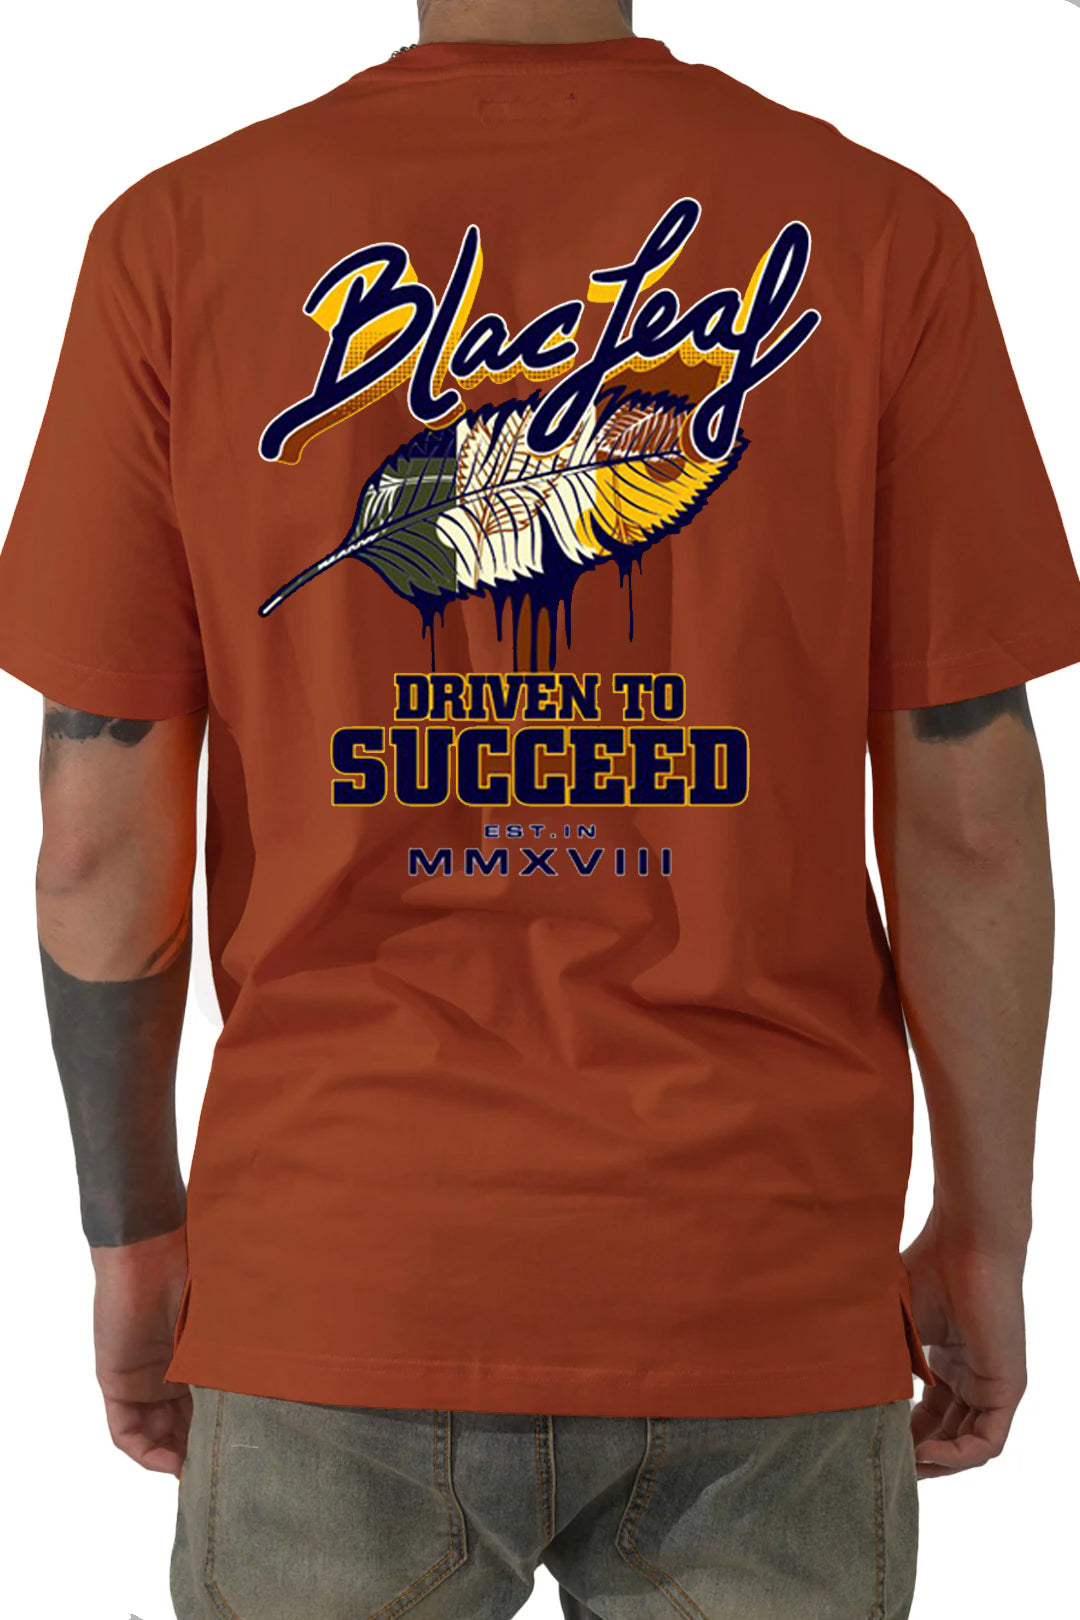 Driven To Succeed Rust Shirt